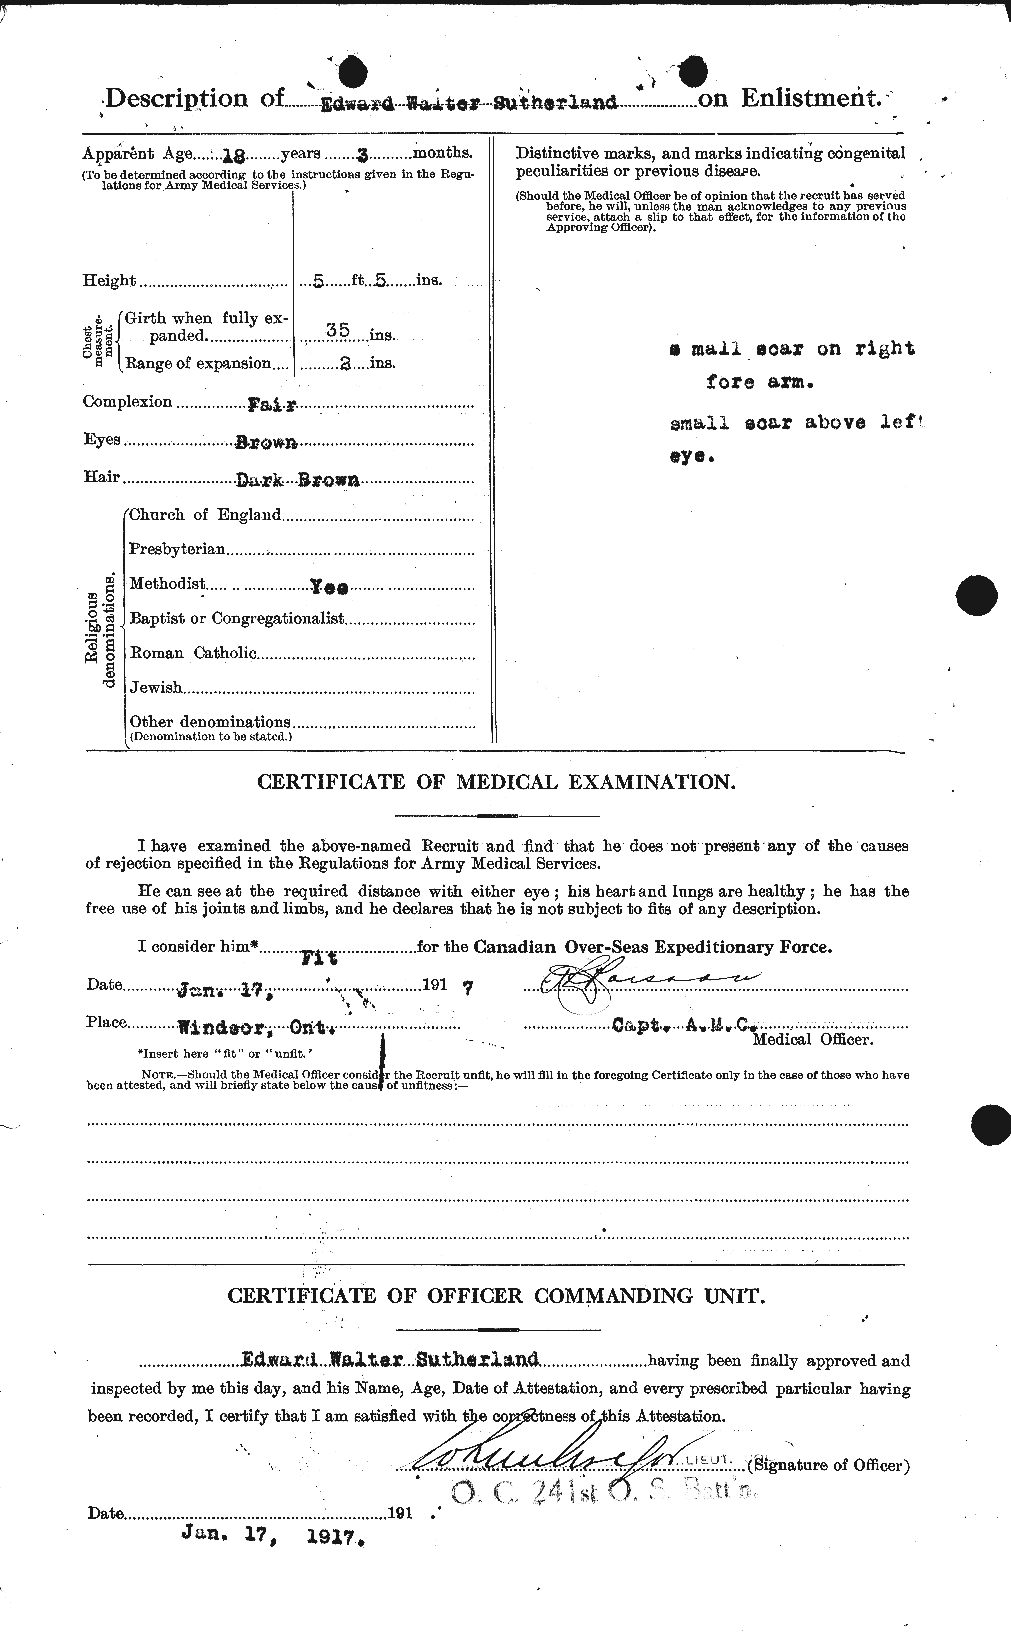 Personnel Records of the First World War - CEF 124900b